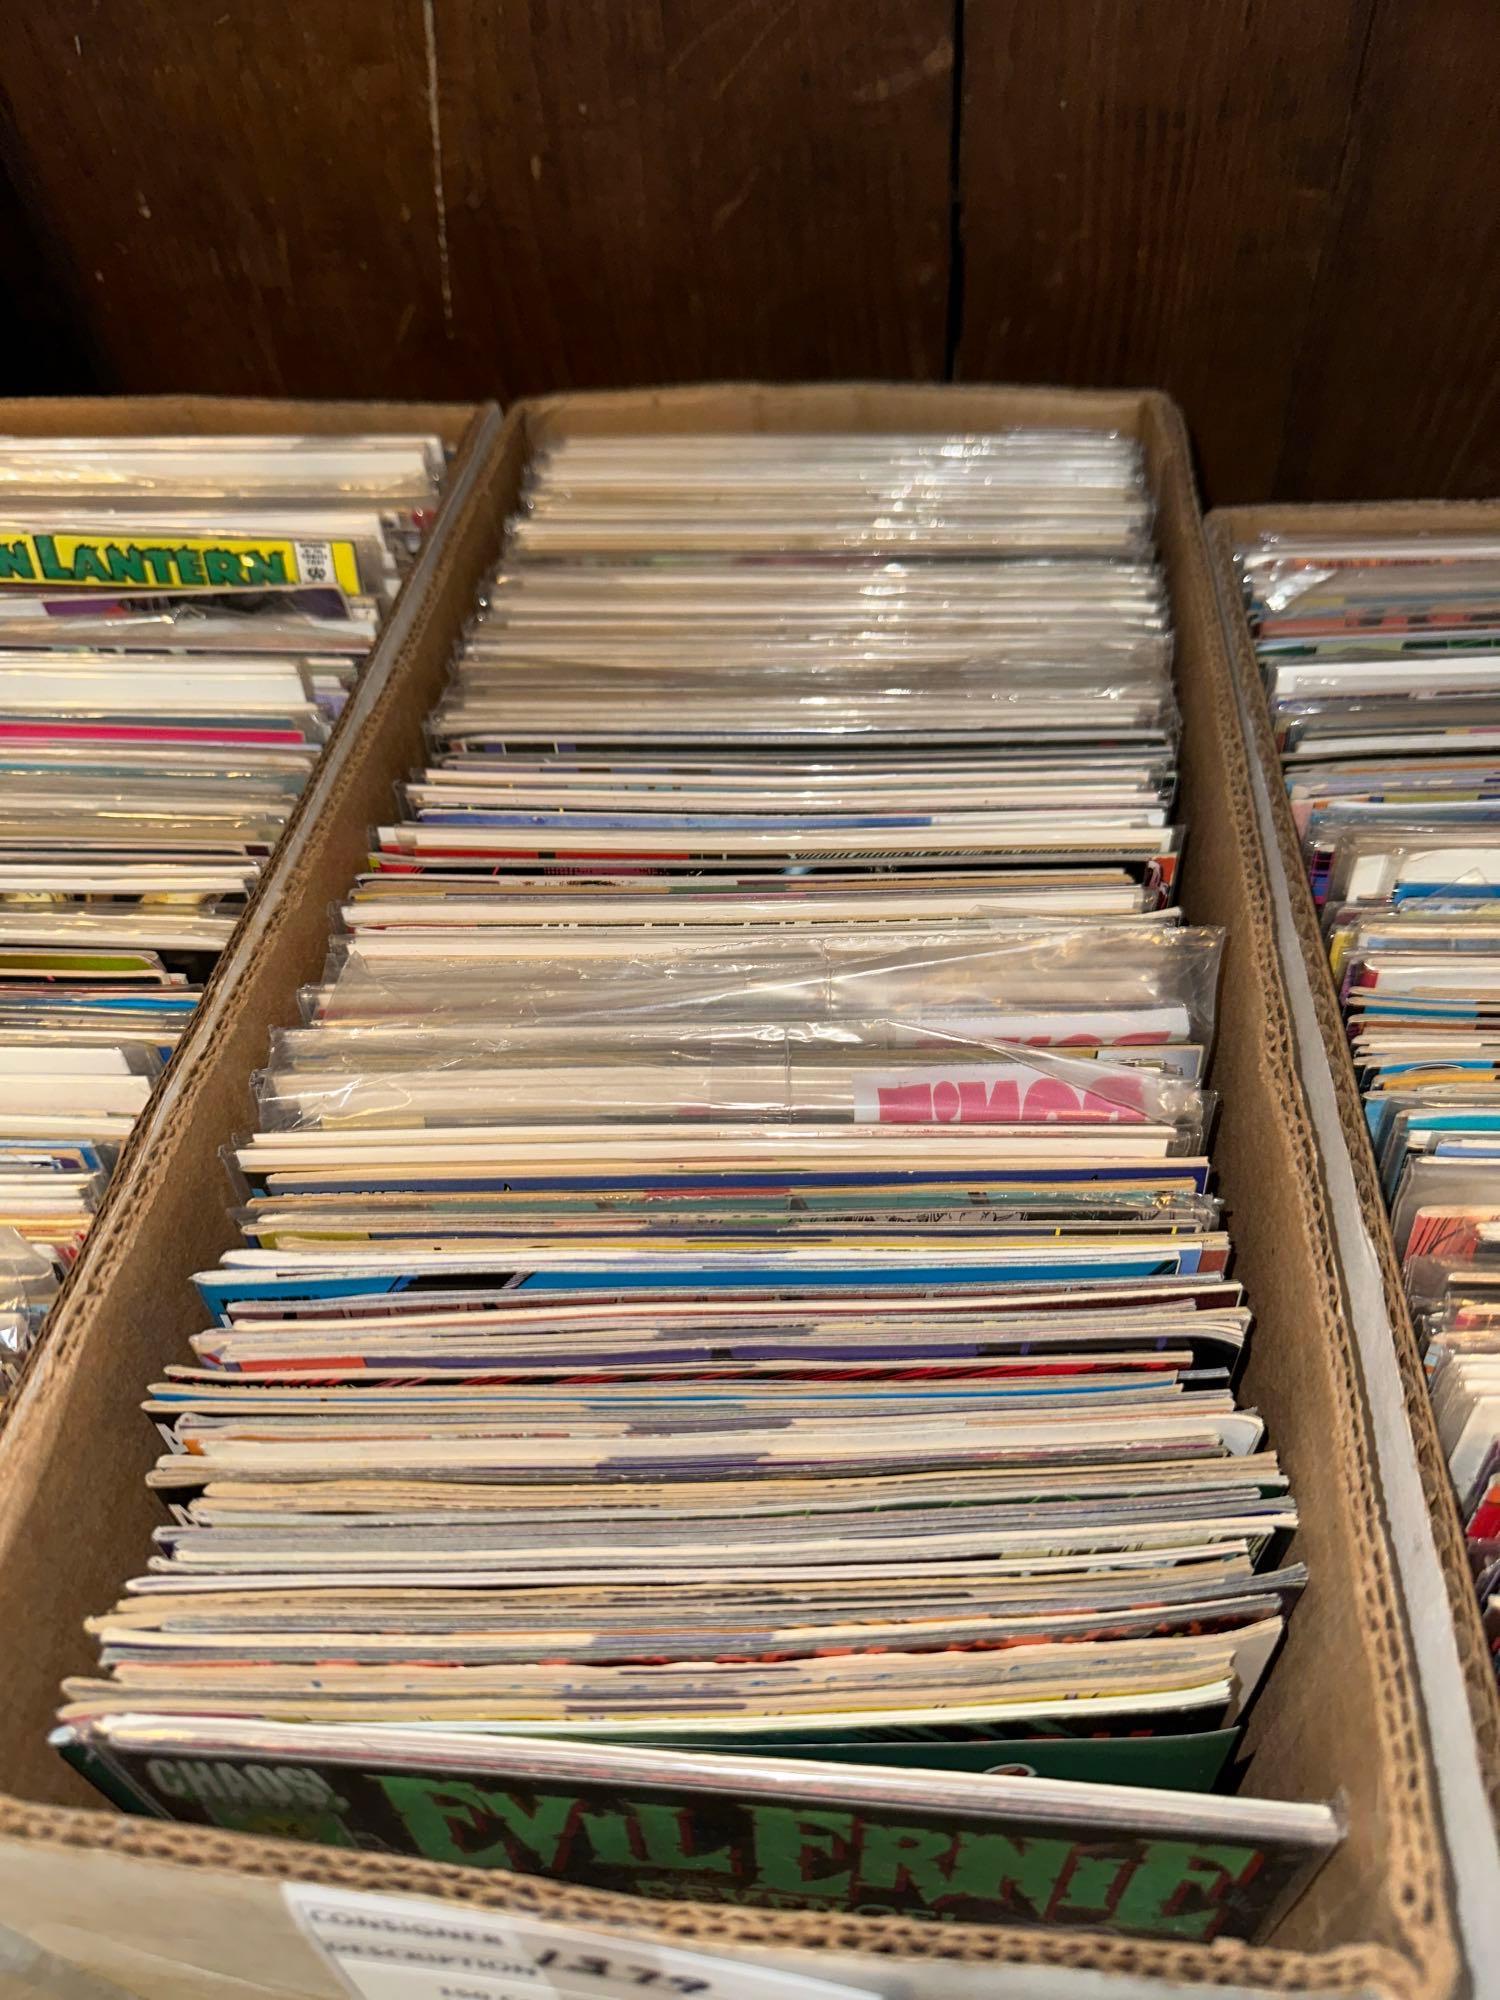 150 Comic Books All VF-NM or Better